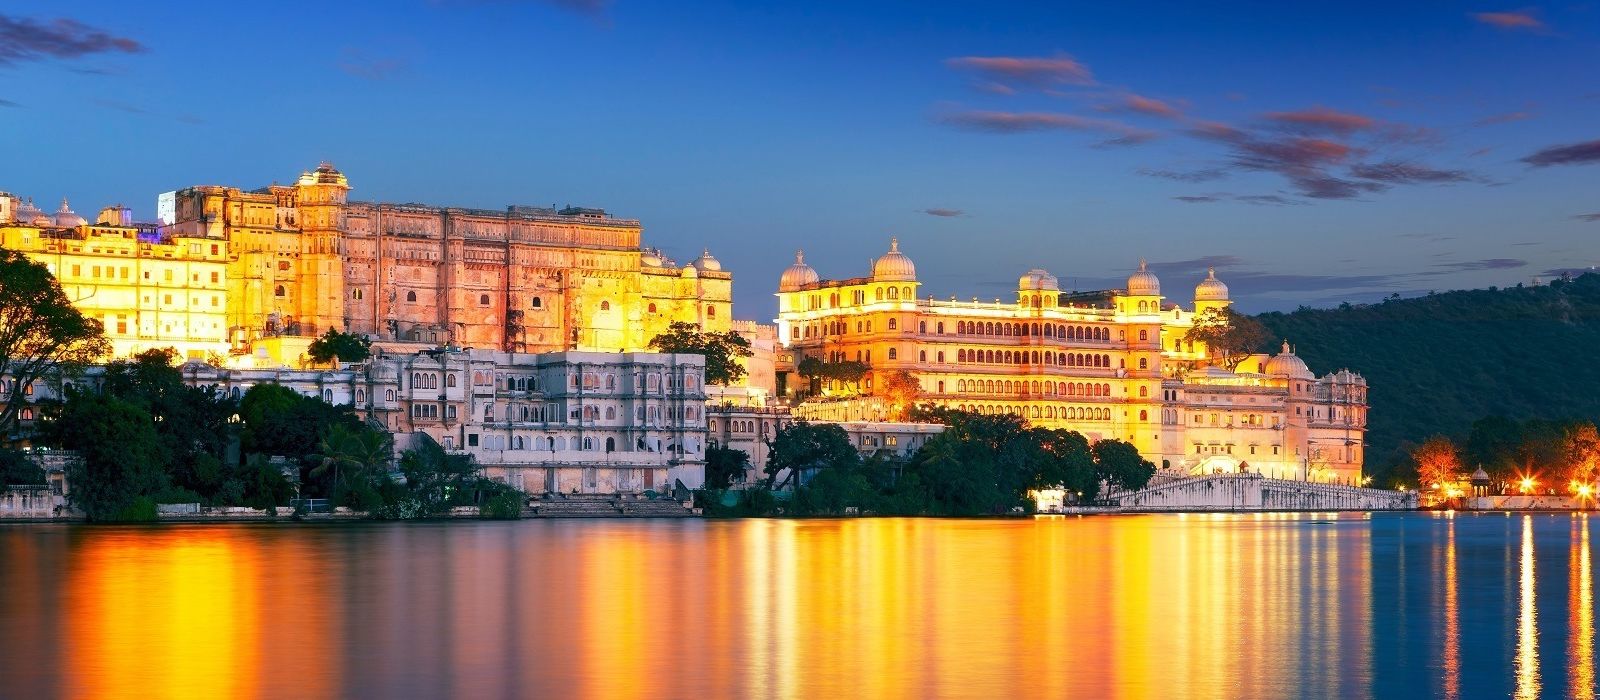 Top 6 Places to visit In Udaipur - The City Of Lakes - Travel Hacks